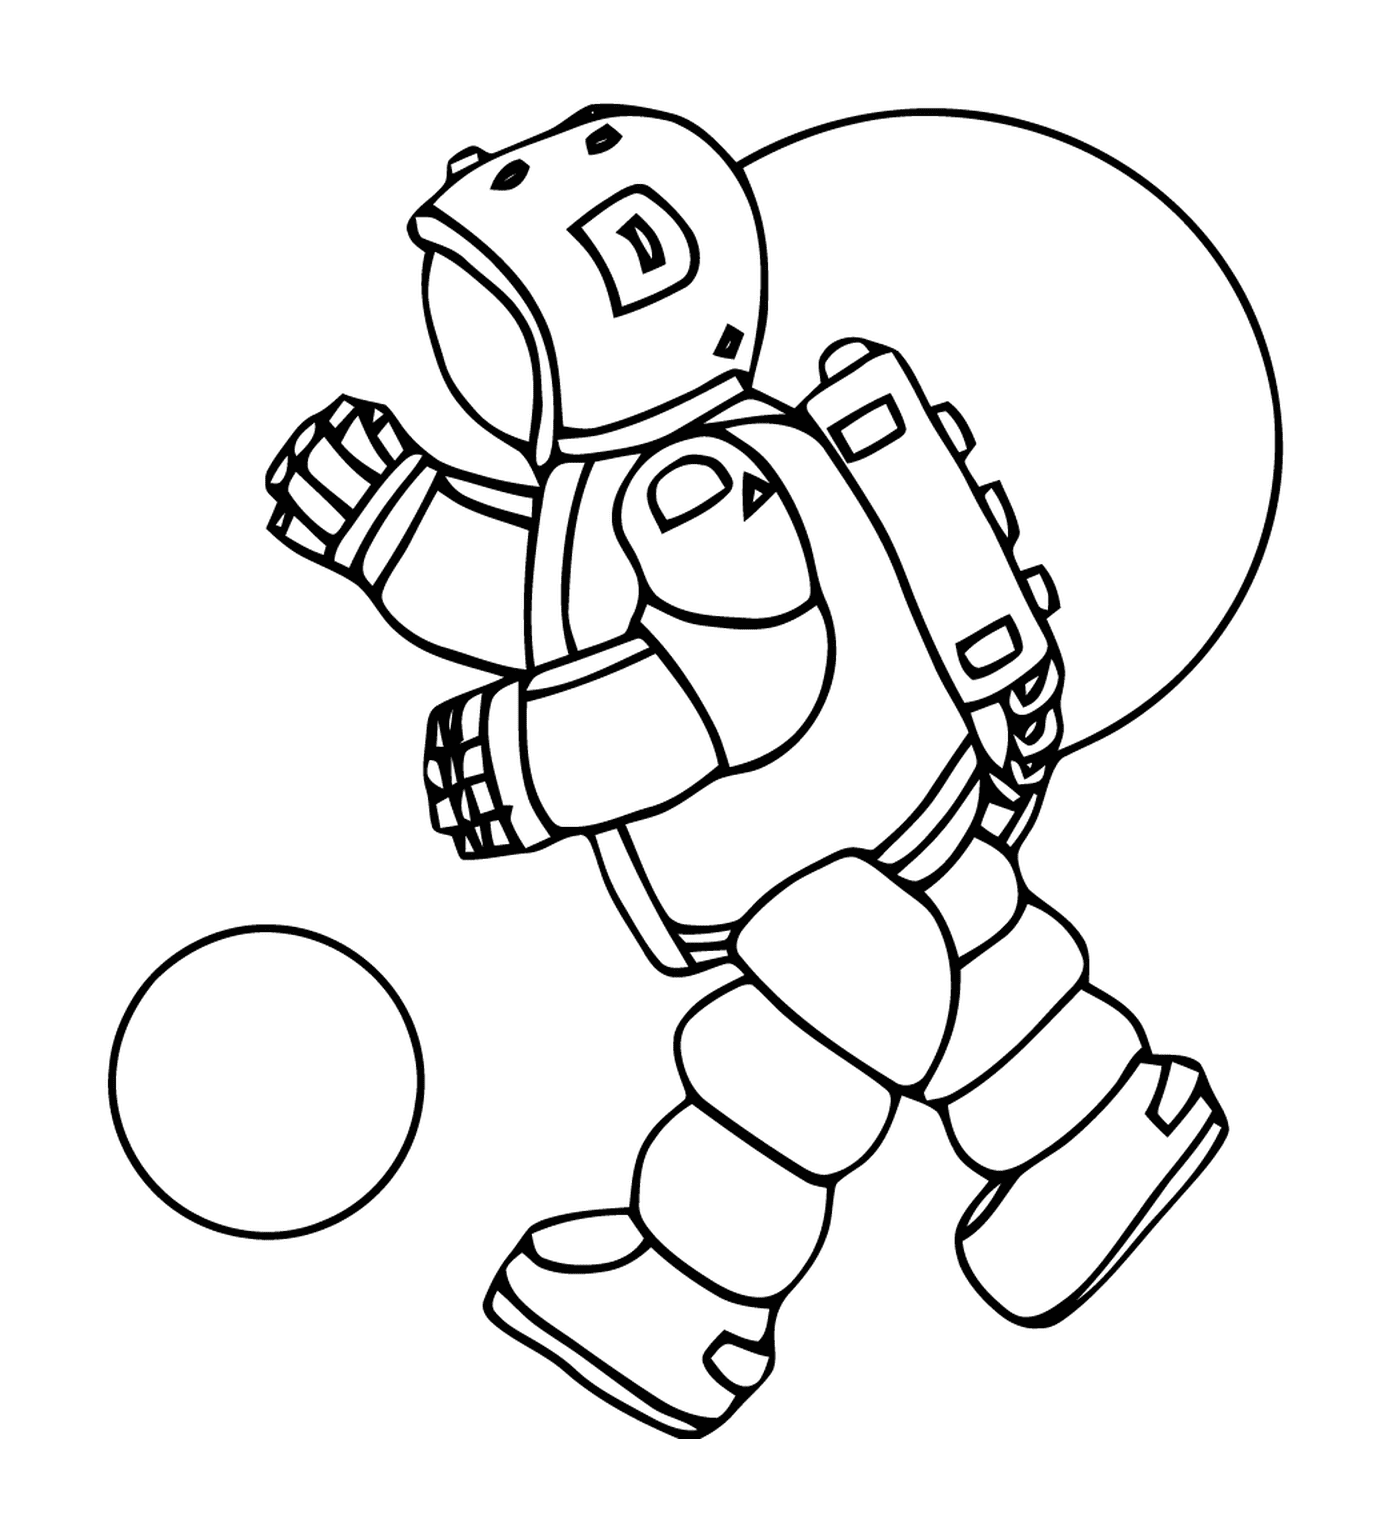  Astronaut playing with a ball 